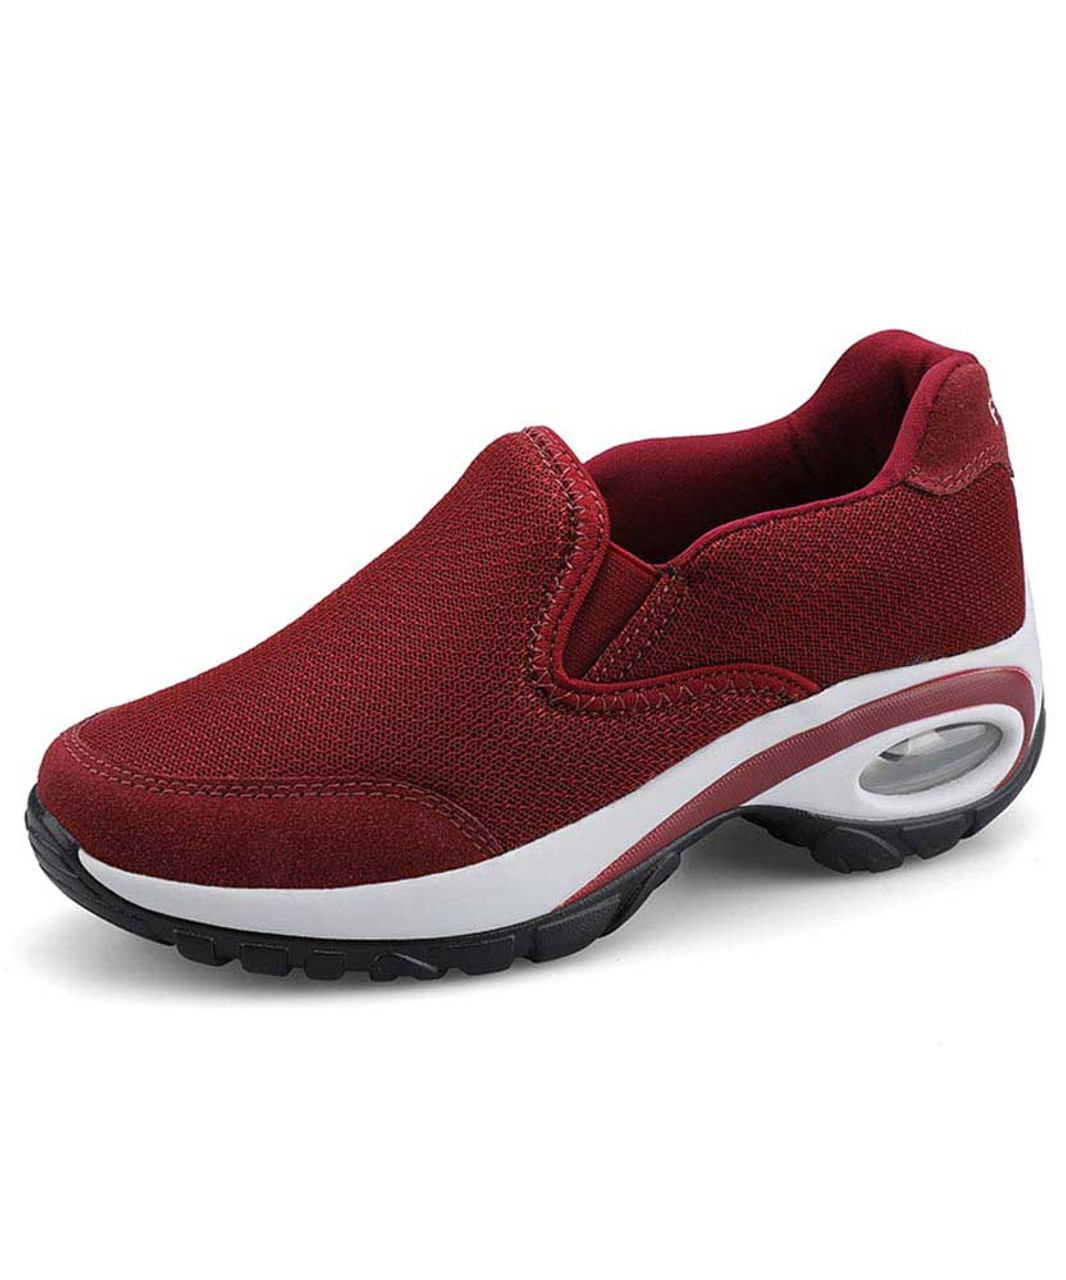 red bottom sneakers for women